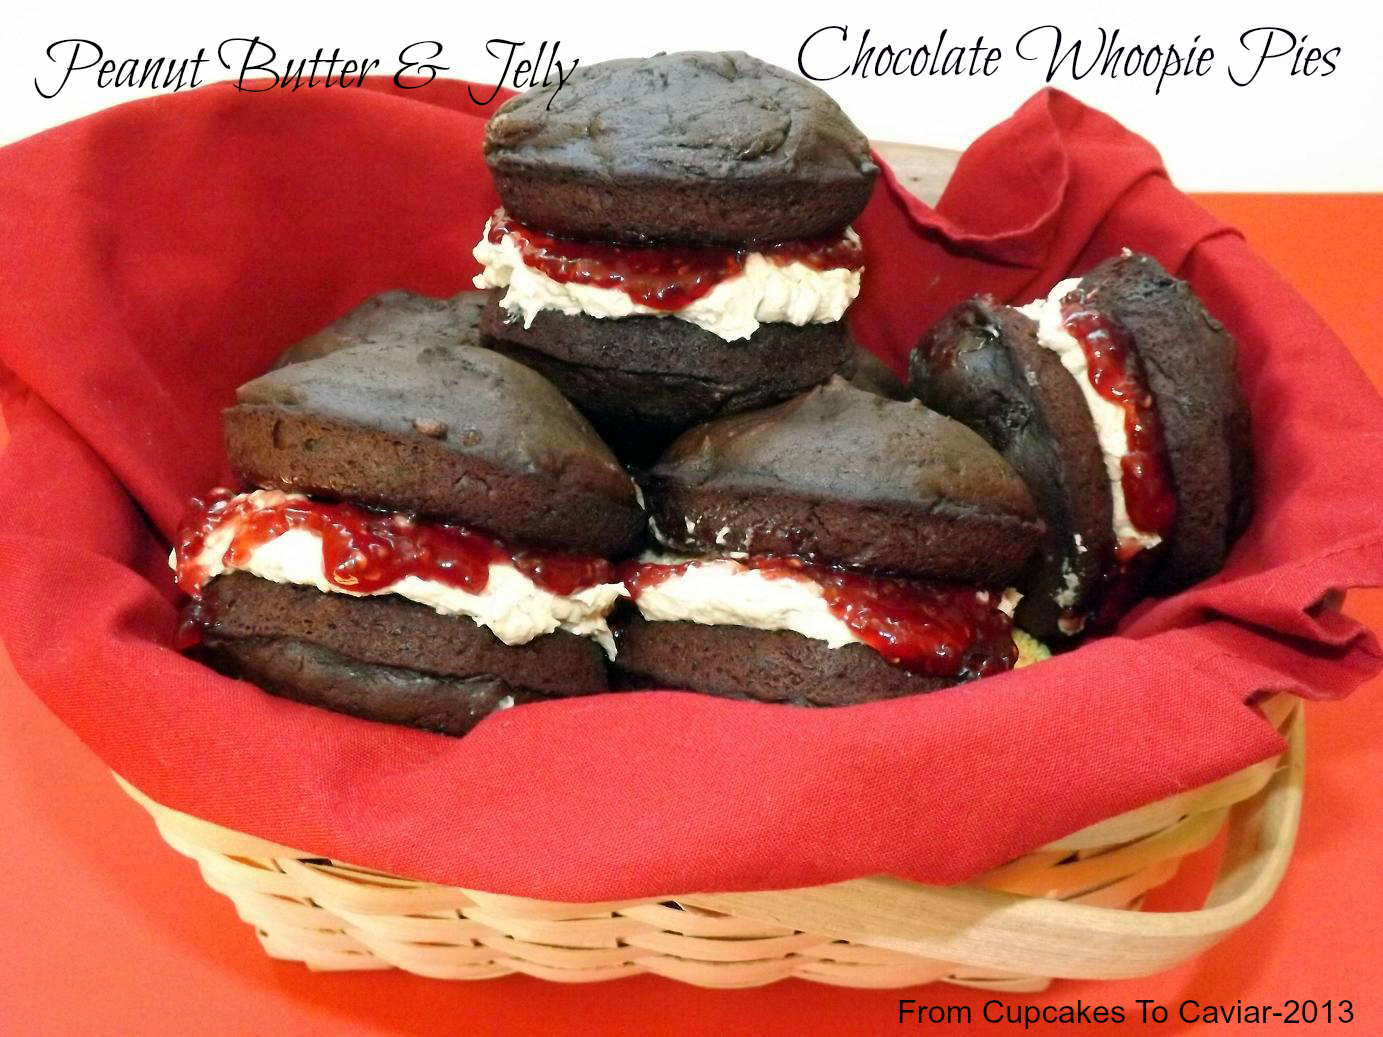 Peanut Butter & Jelly Chocolate Whoopie Pies